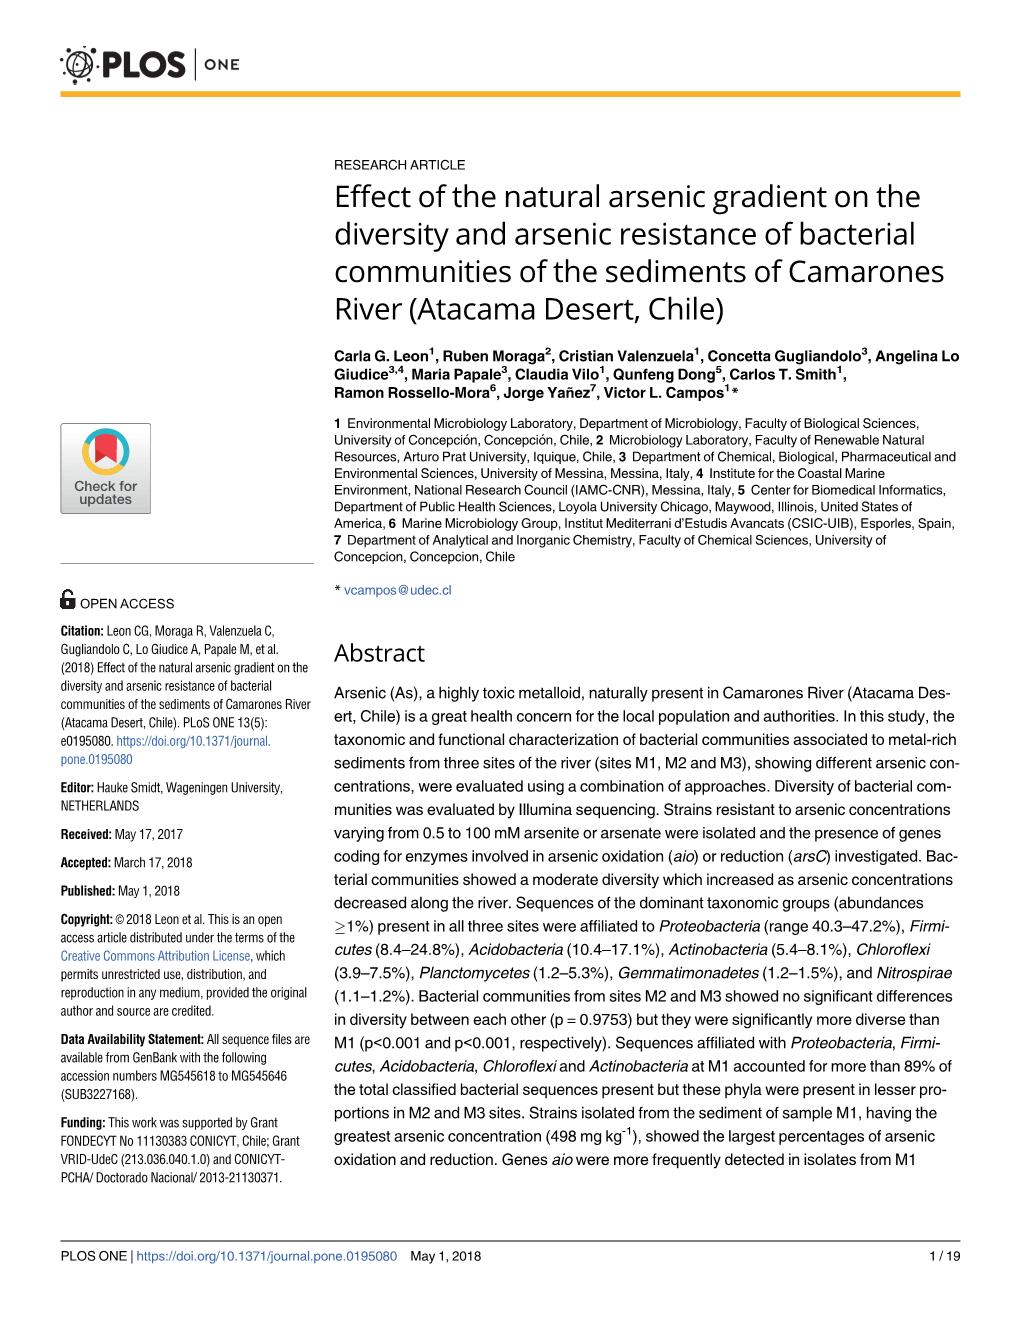 Effect of the Natural Arsenic Gradient on the Diversity and Arsenic Resistance of Bacterial Communities of the Sediments of Camarones River (Atacama Desert, Chile)